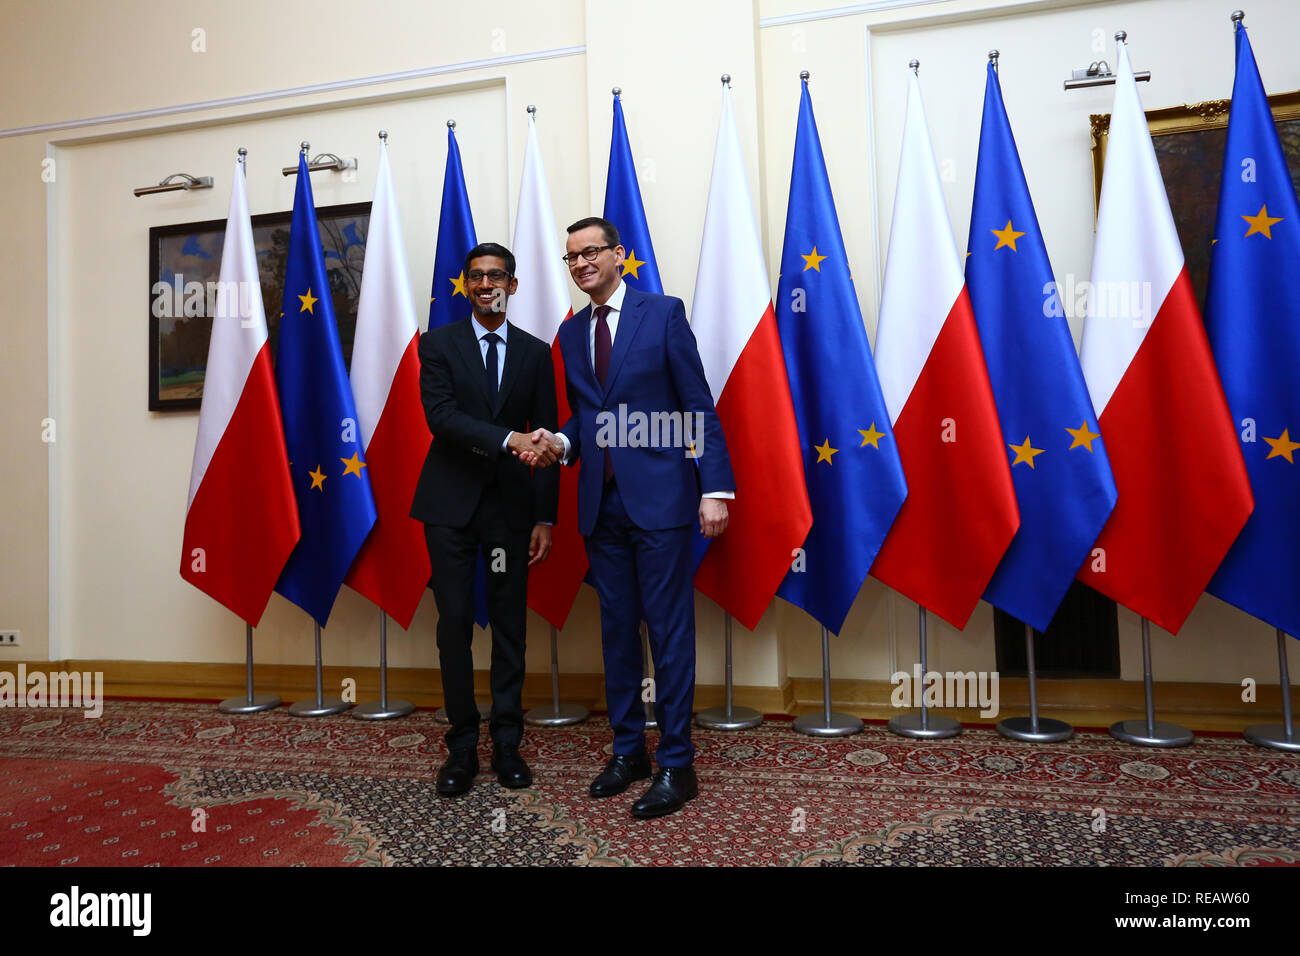 Poland, Warsaw, 21st January 2019: Google CEO Sundararajan Pichai (L) meets with Polish Prime Minister Mateusz Morawiecki (R) in Warsaw. Pichai visits Poland to participate in the 'Central and Eastern Innotvation Roundtable'. ©Jake Ratz/Alamy Live News Stock Photo